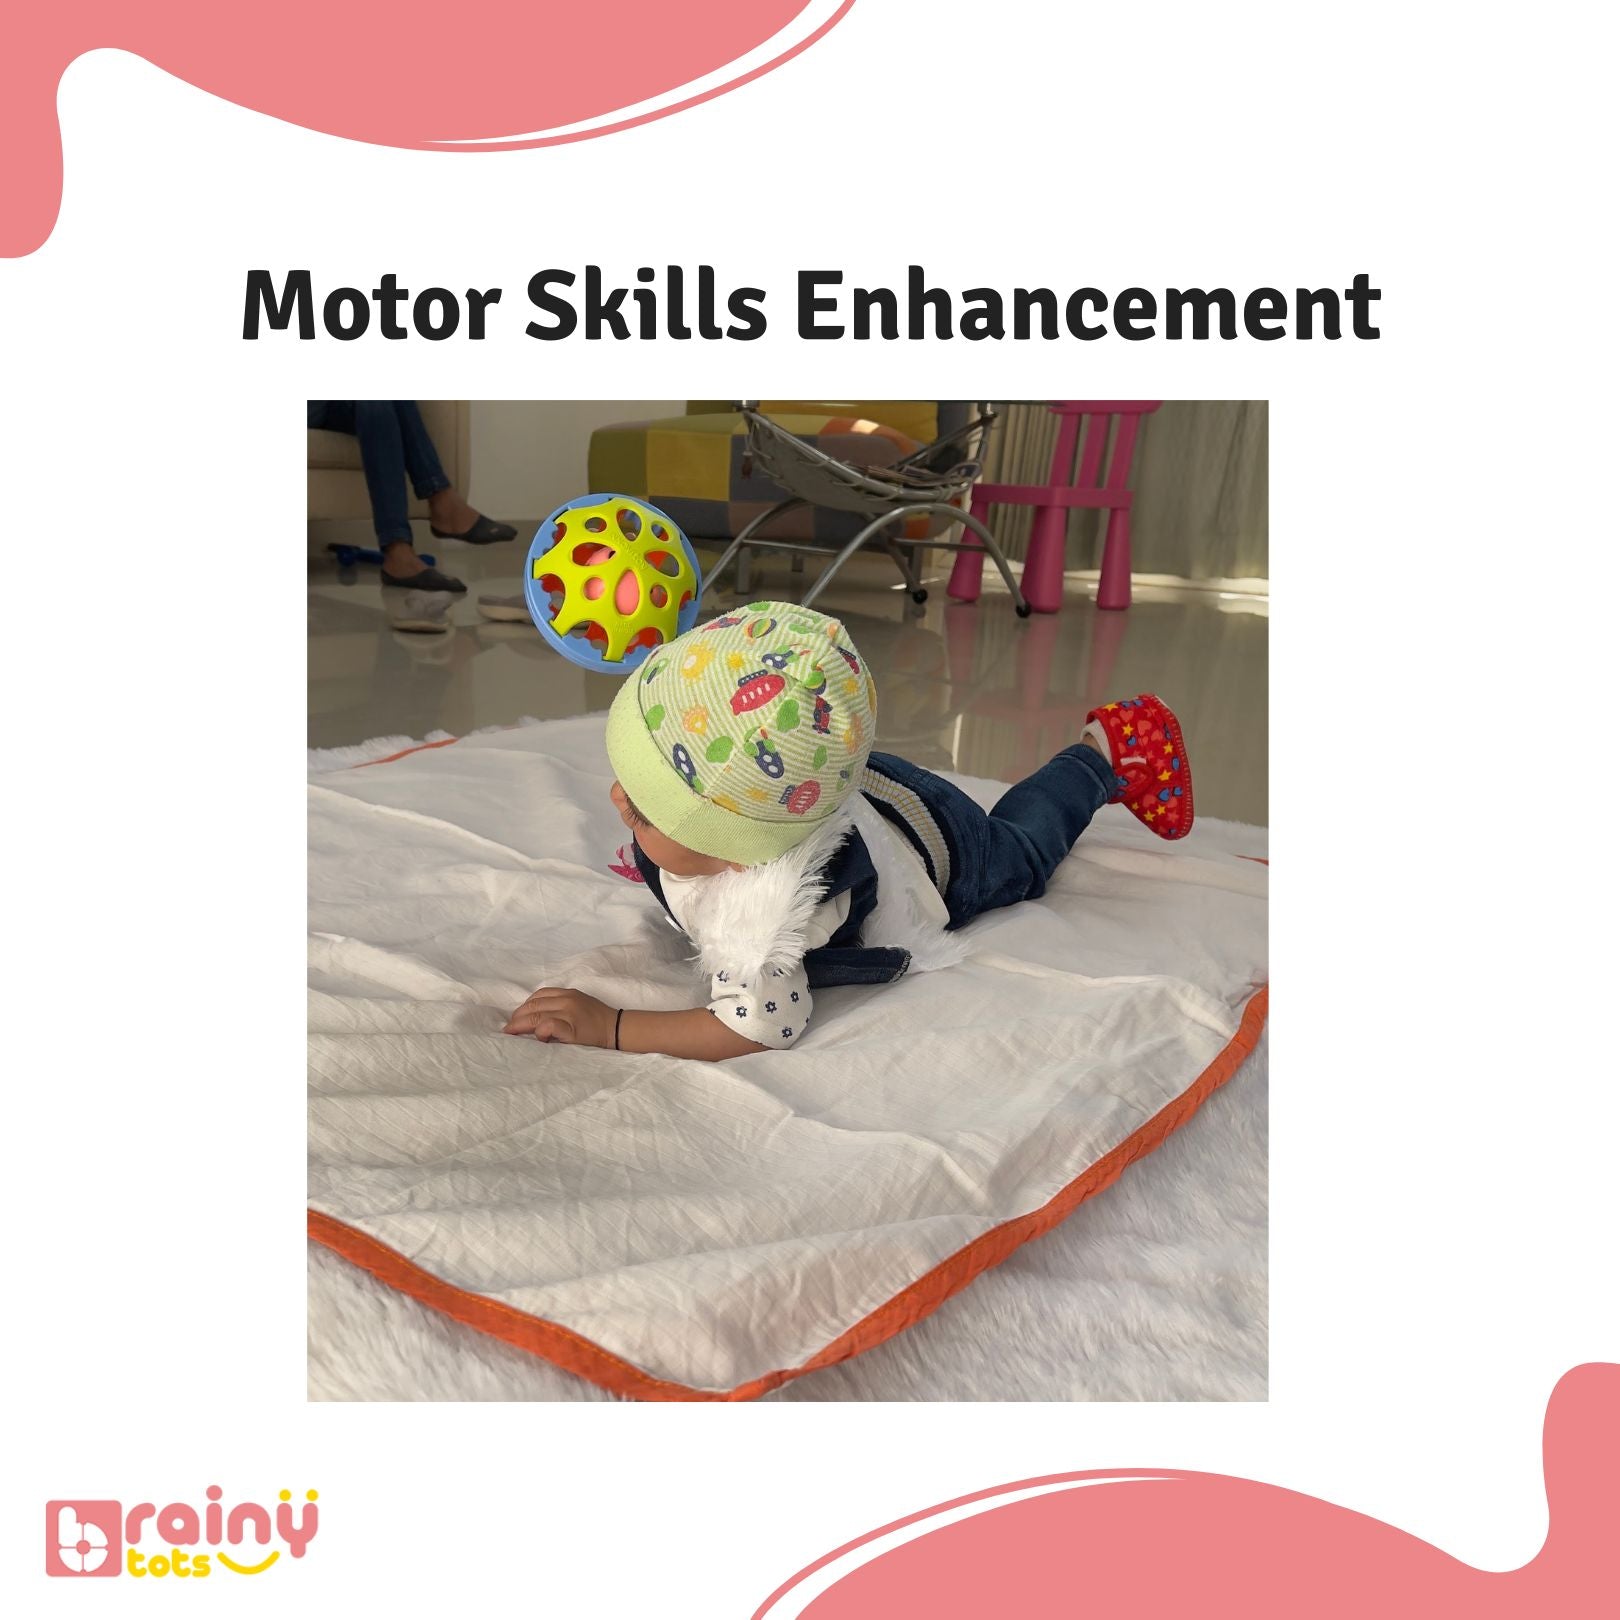 Enhance motor skills with our O Ball. Crafted with dynamic shapes and easy-to-grasp design, this versatile toy promotes the development of fine and gross motor skills in infants and toddlers, fostering coordination and strength through play.